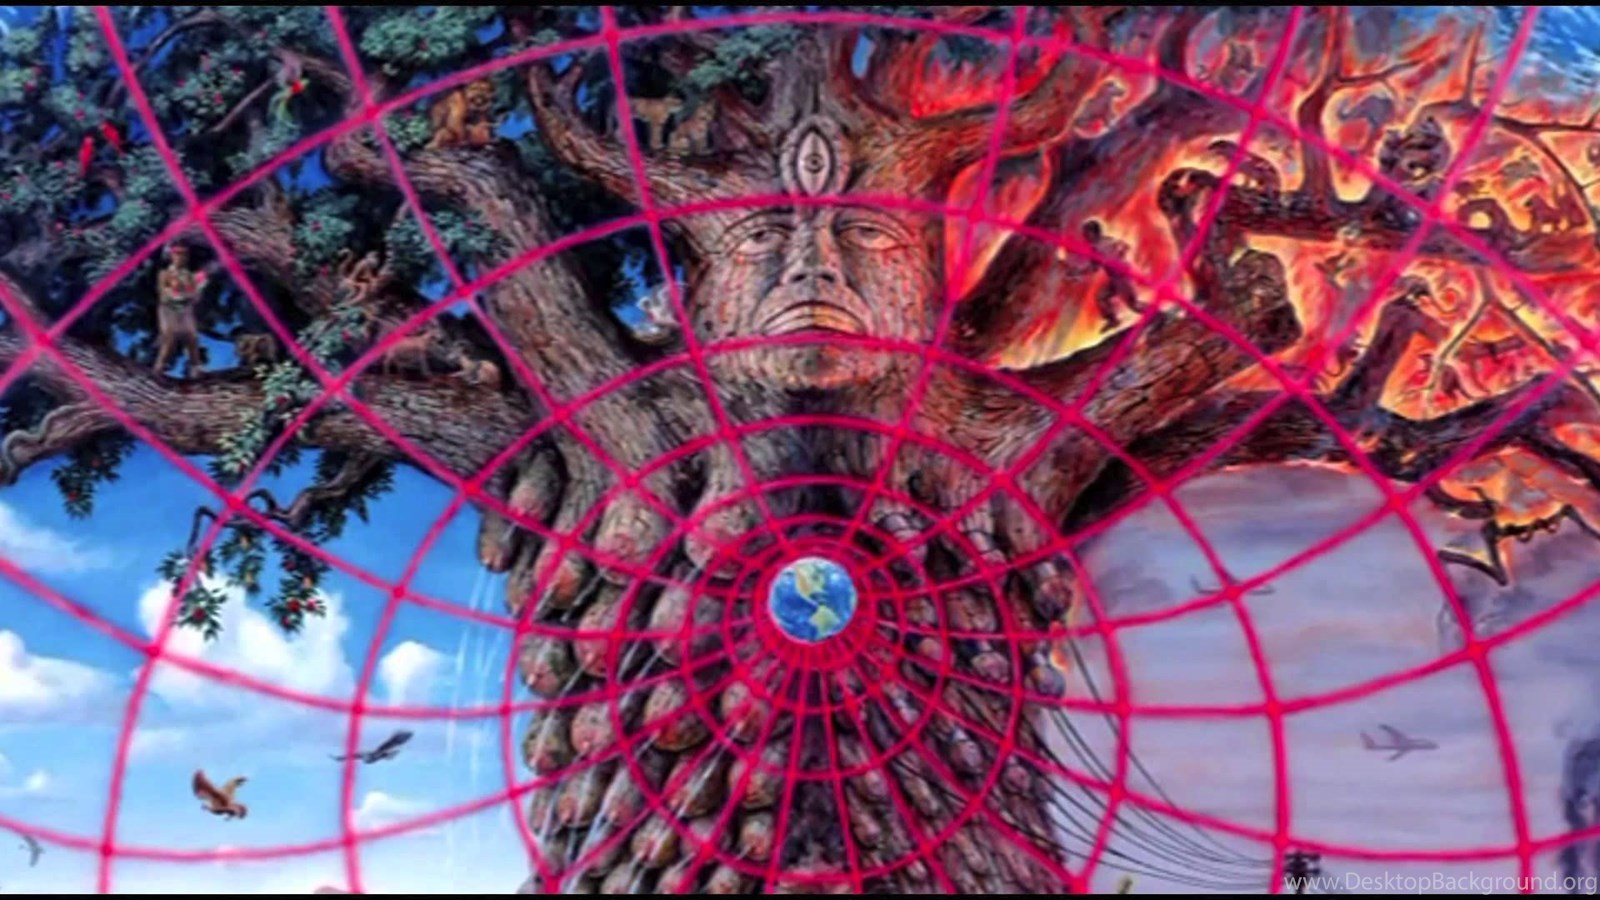 Download Book: 'The Mission Of Art' By Alex Grey Widescreen Wides...